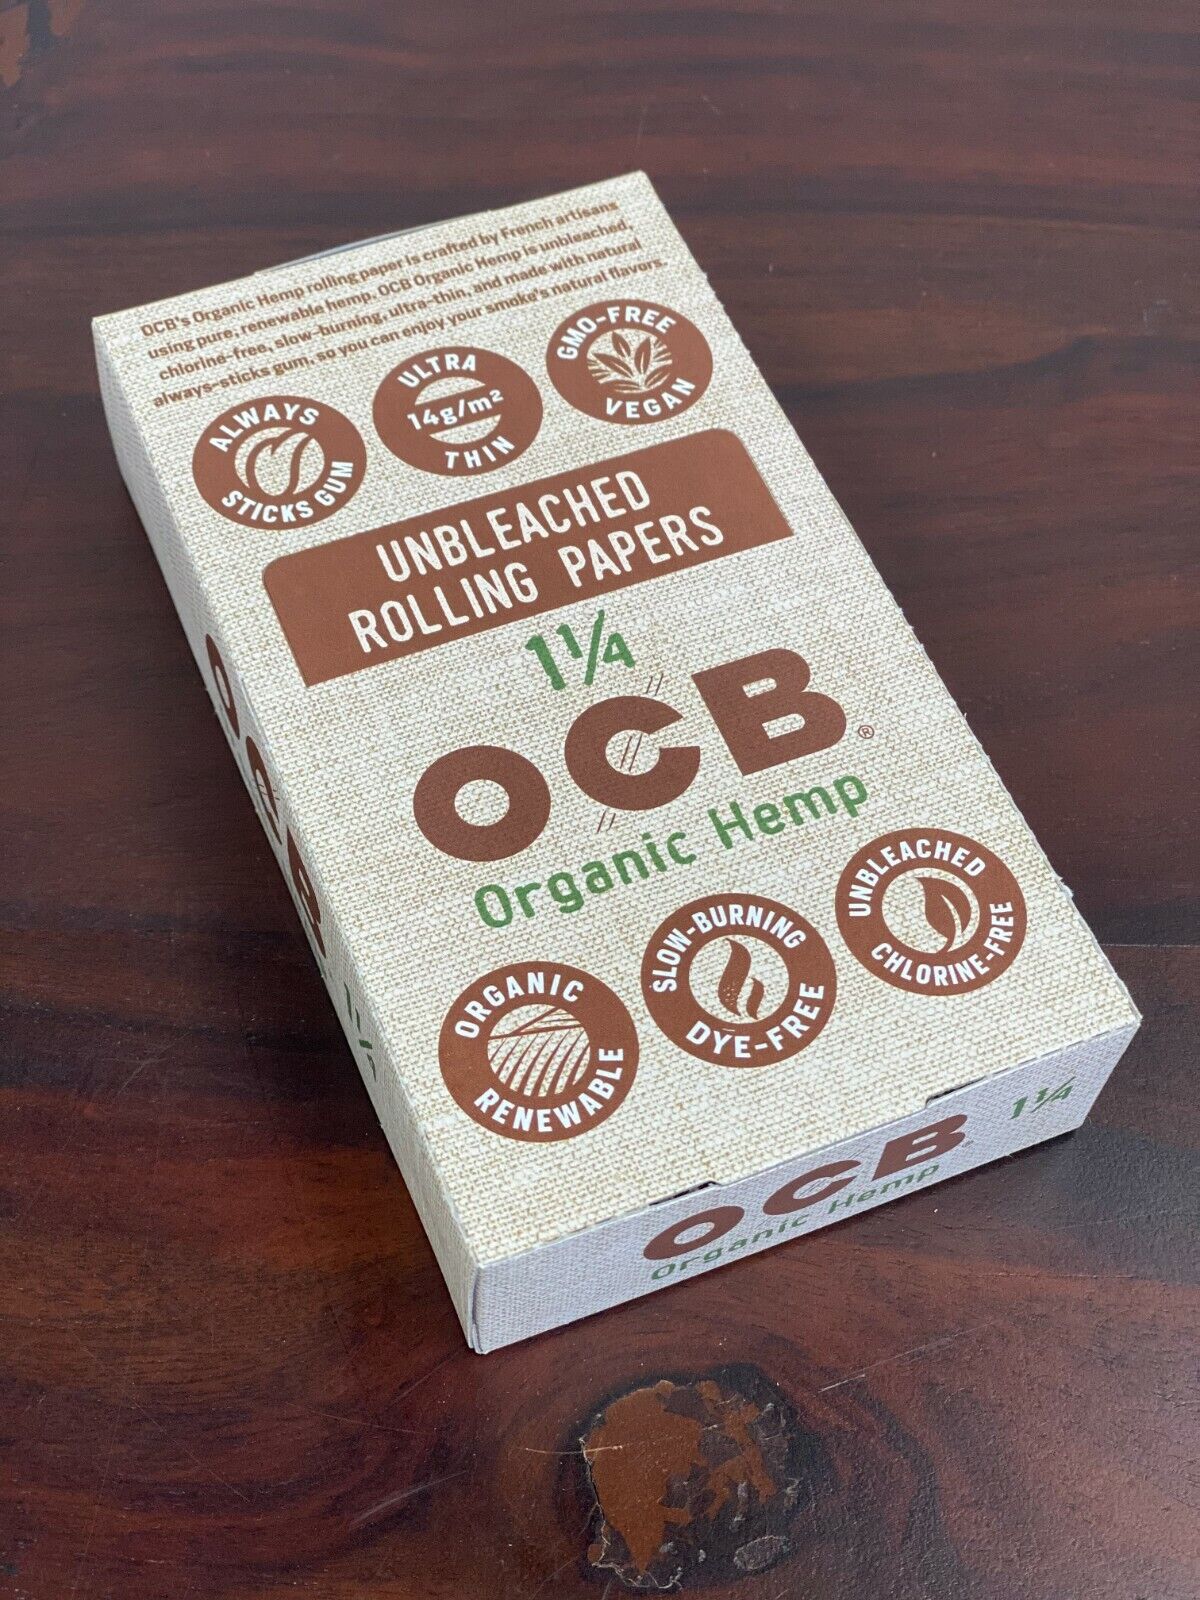 OCB Organic Cigarette  Rolling Papers 1 1/4 - 24 Booklets - Factory Box 